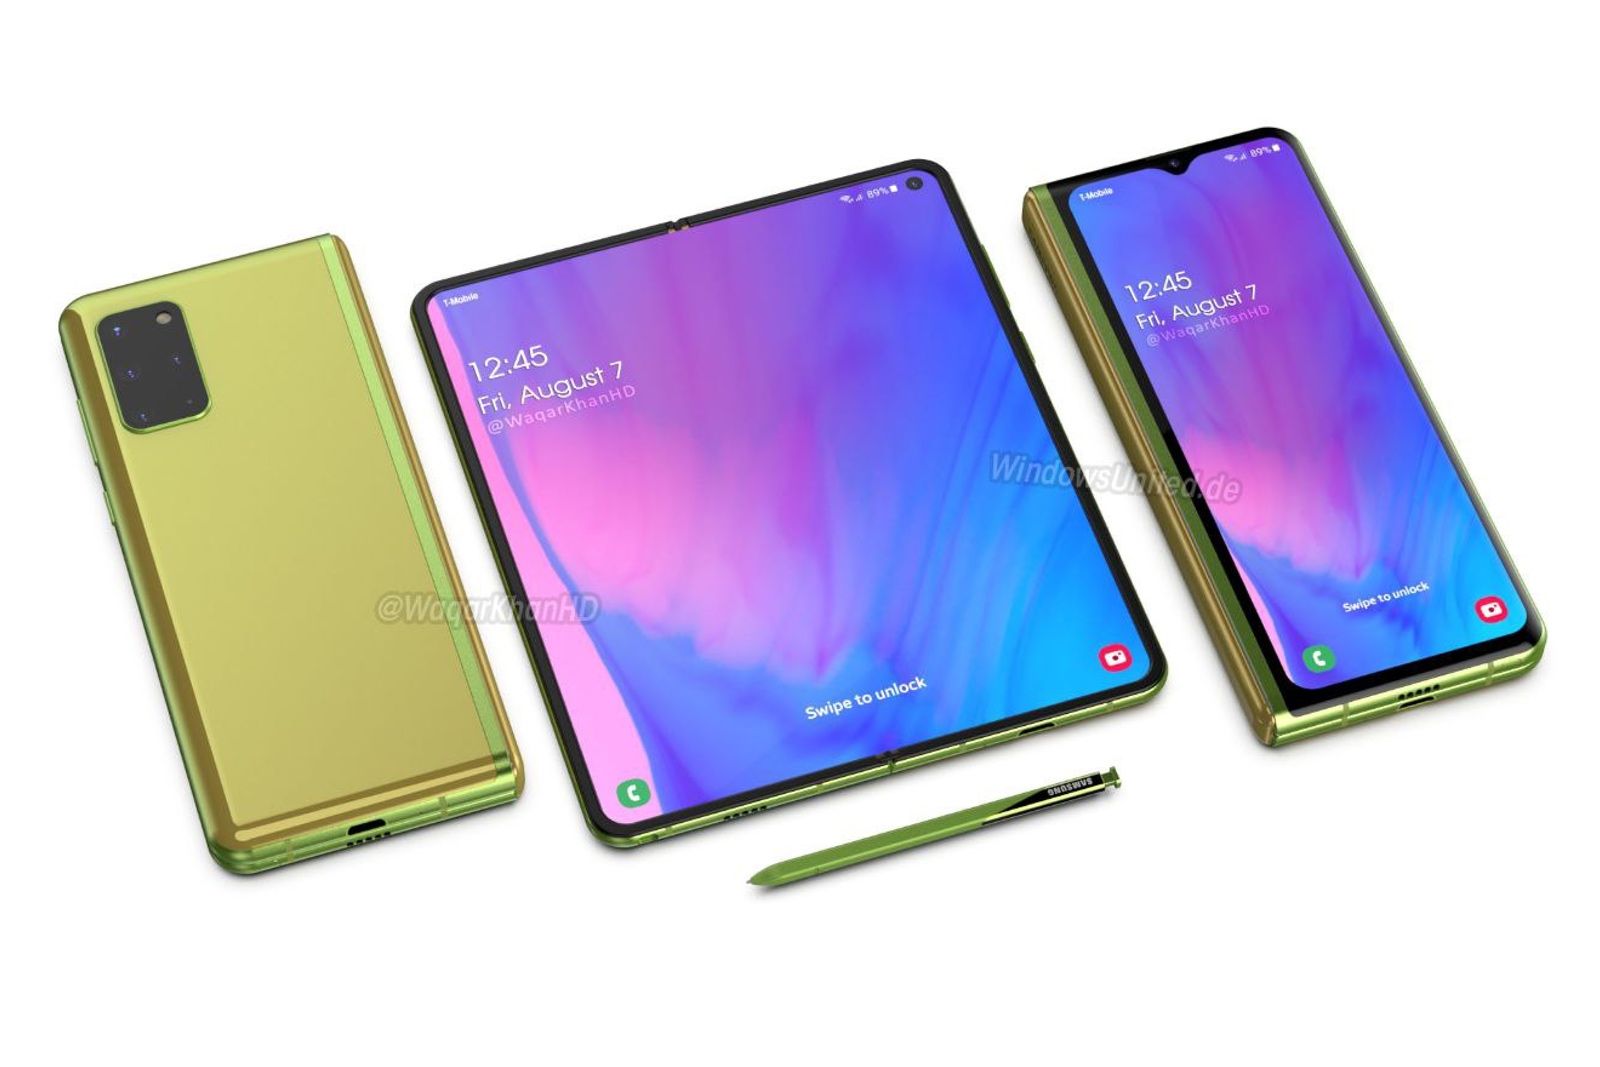 New renders show what the Samsung Galaxy Fold 2 could look like image 1